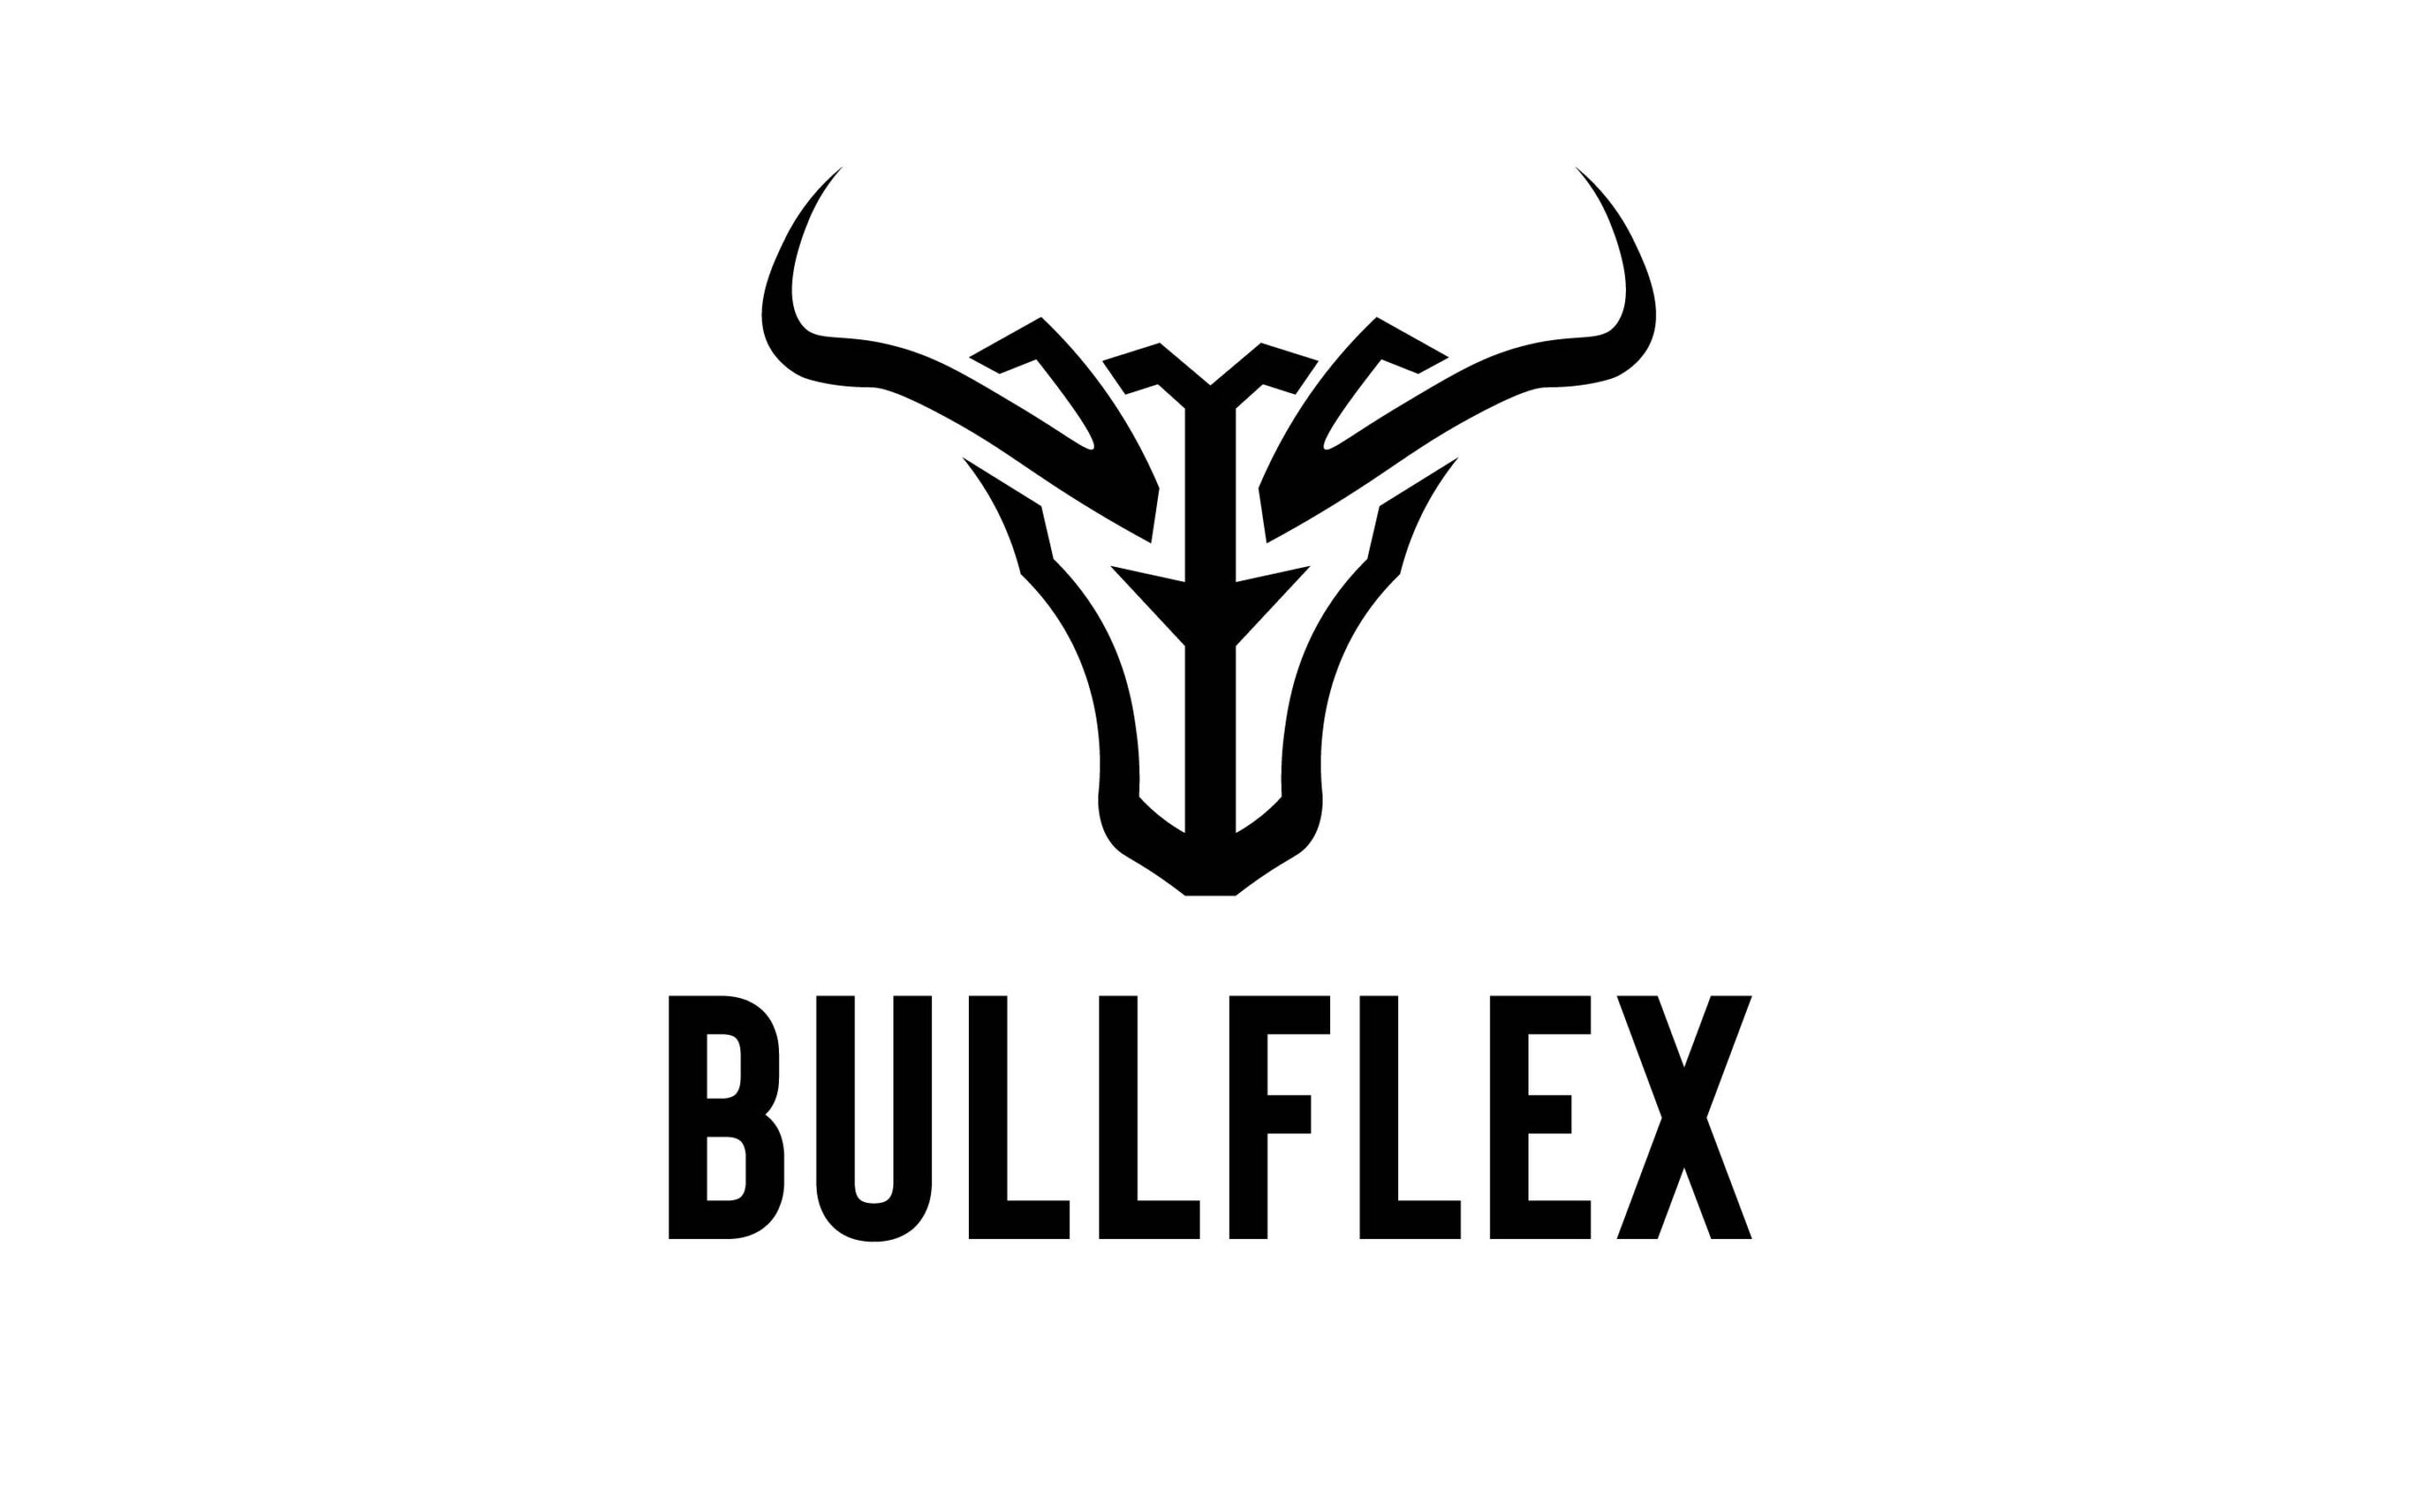 Bullflex Rubber's Homepage Logo: An Emblem of Quality, Innovation, and Excellence.